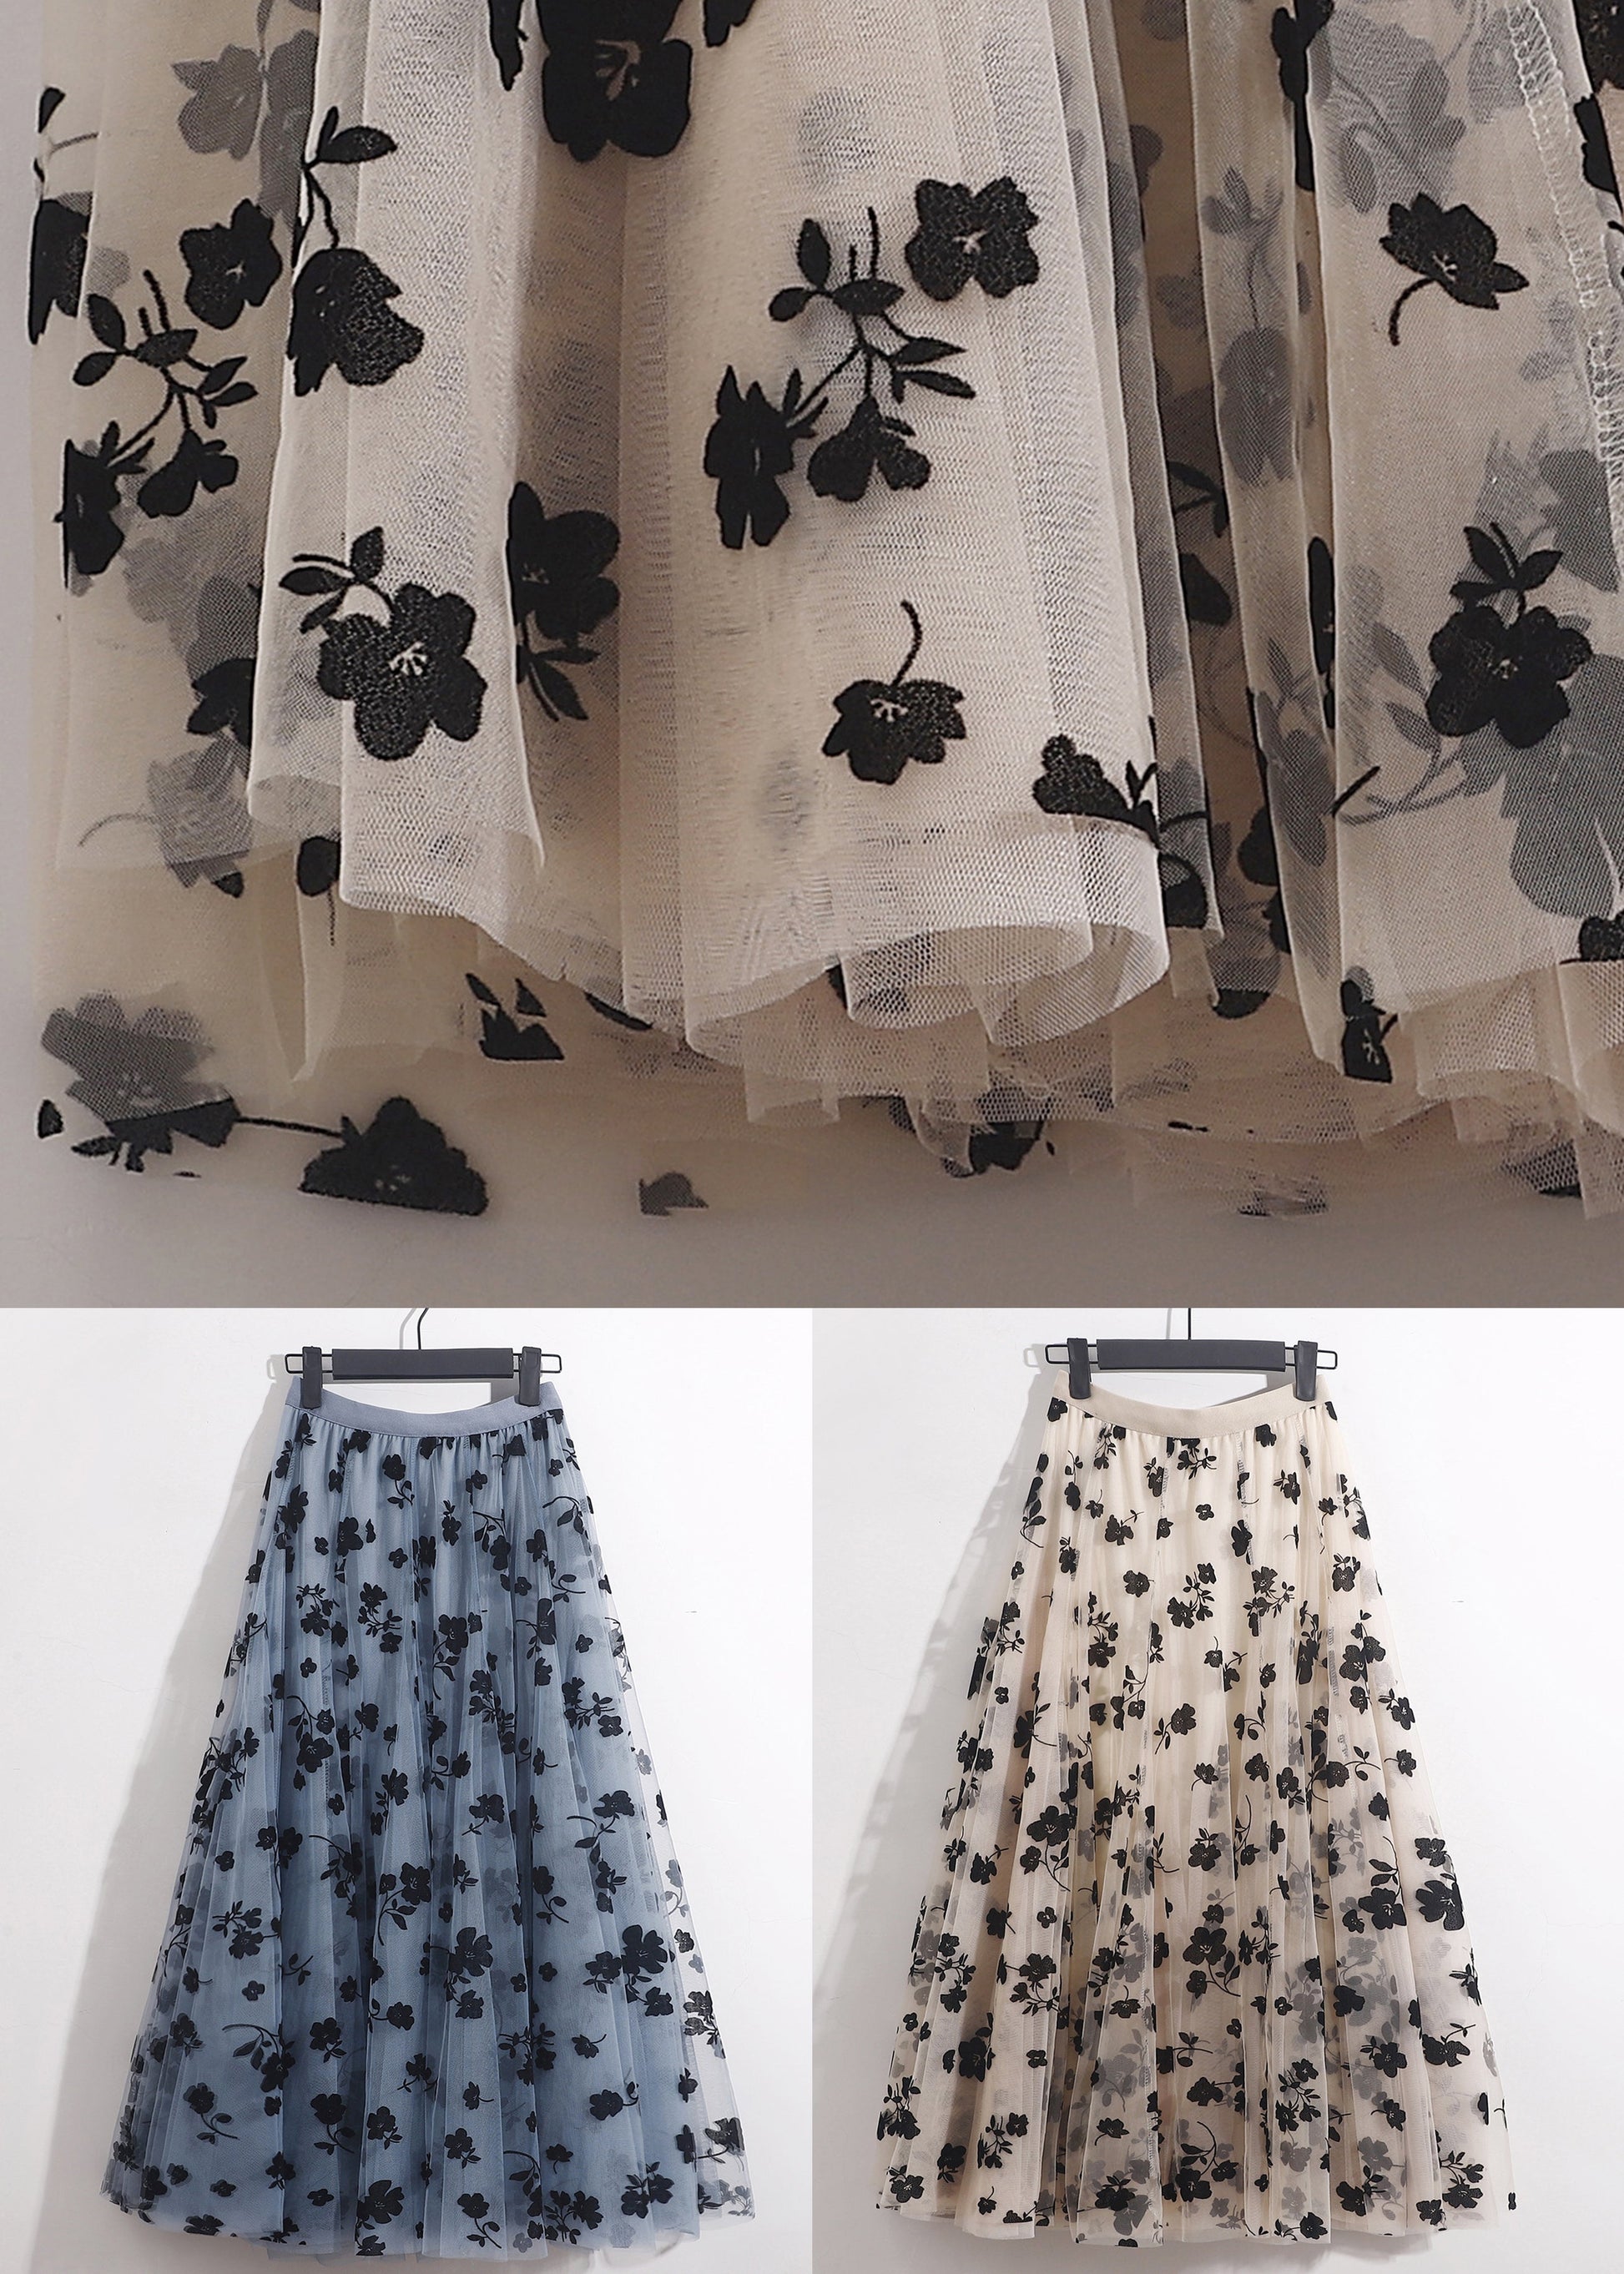 Apricot Wrinkled Loose Tulle Skirts High Waist Ada Fashion